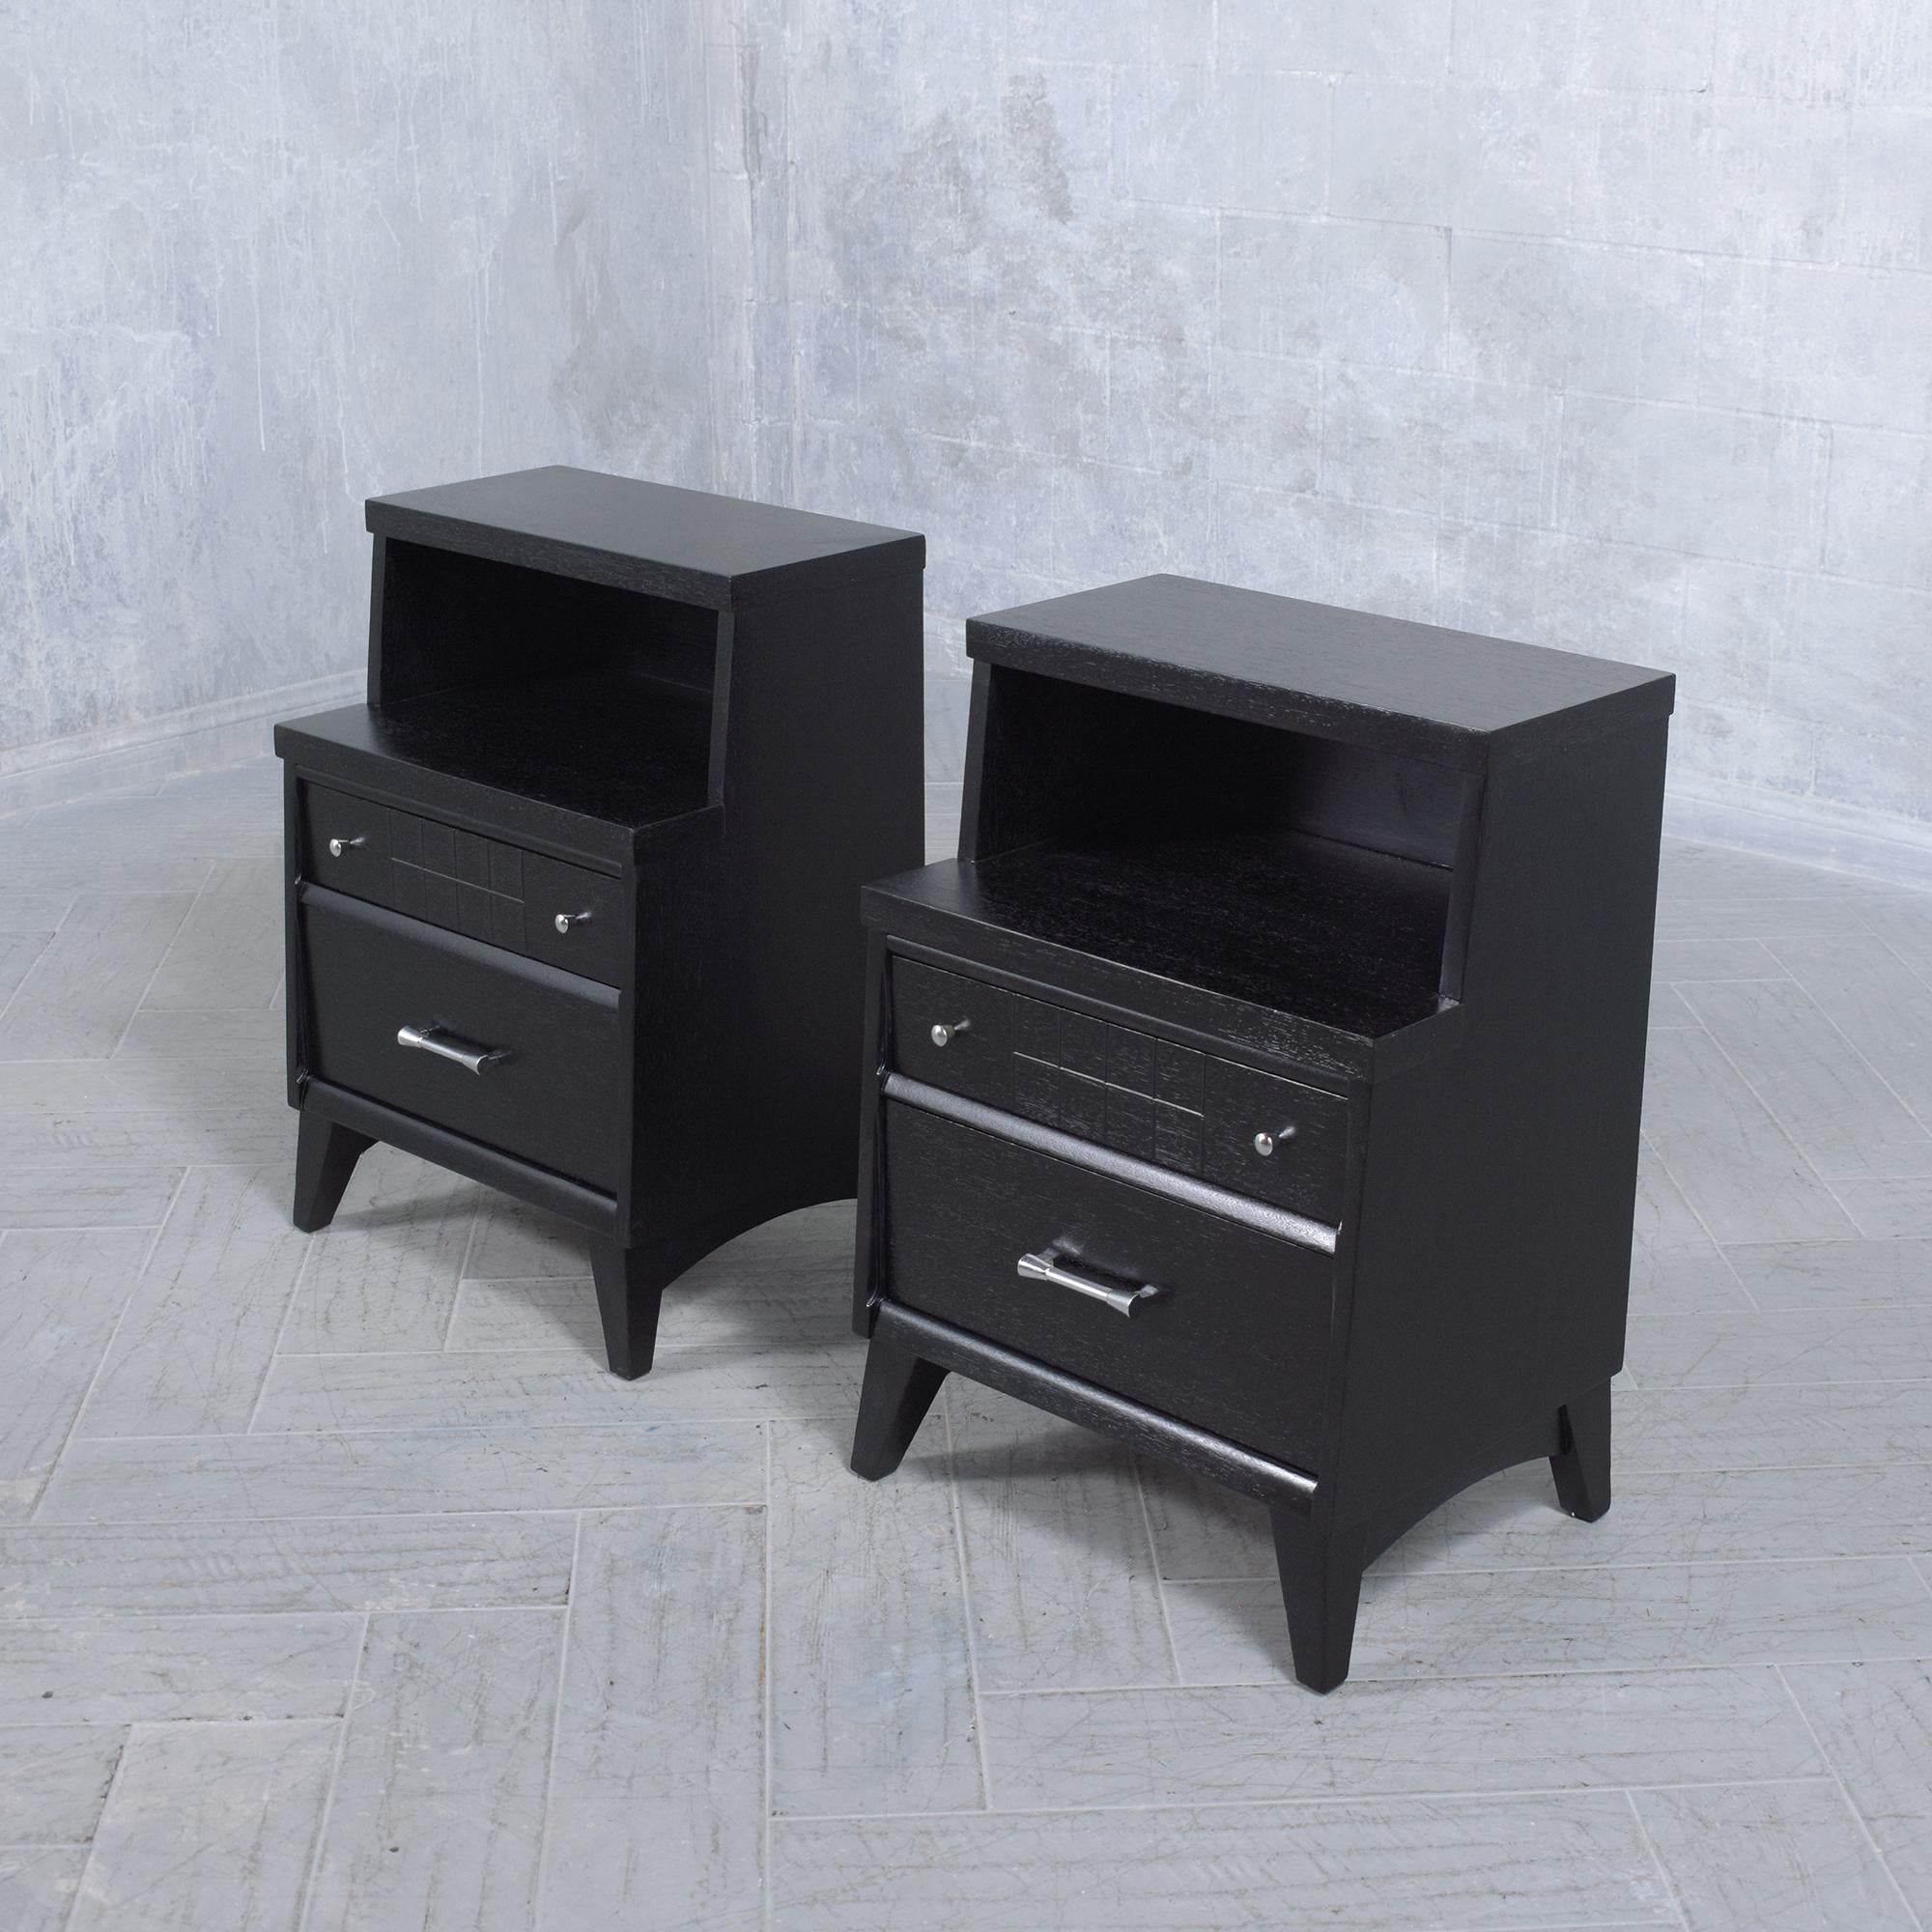 Mid-20th Century Restored Mid-Century Modern Nightstands with Ebonized Finish and Chrome Hardware For Sale